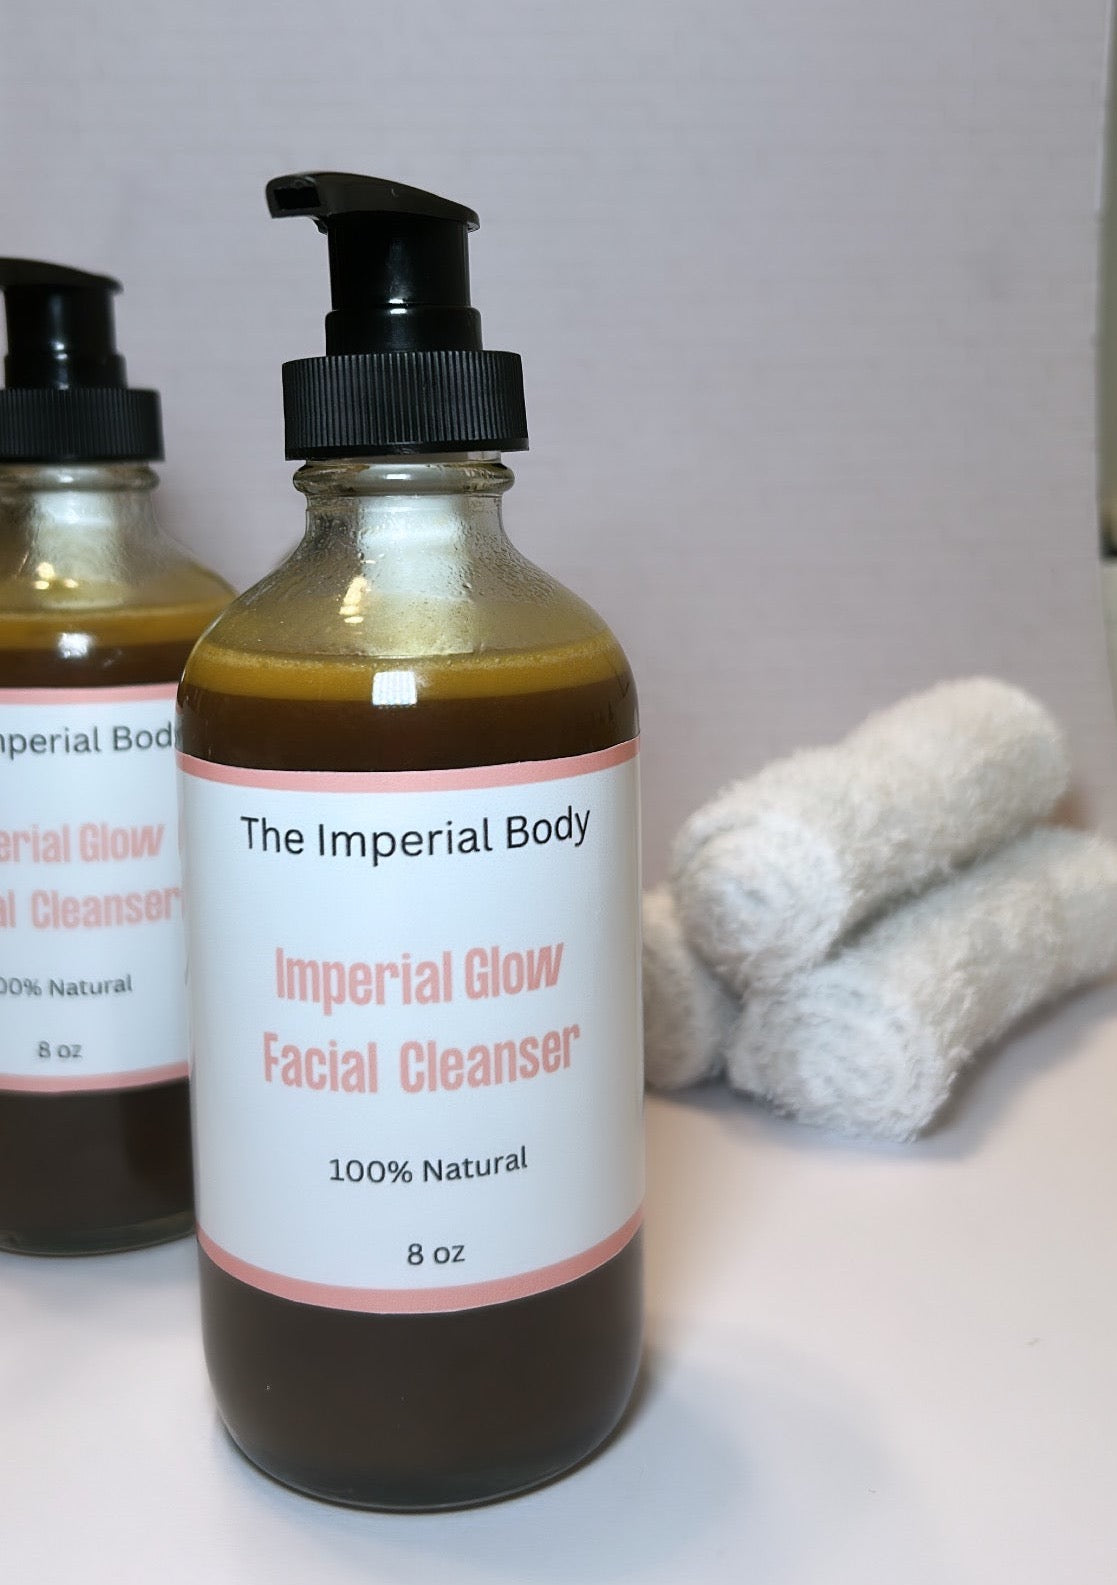 Imperial Glow Facial Cleanser